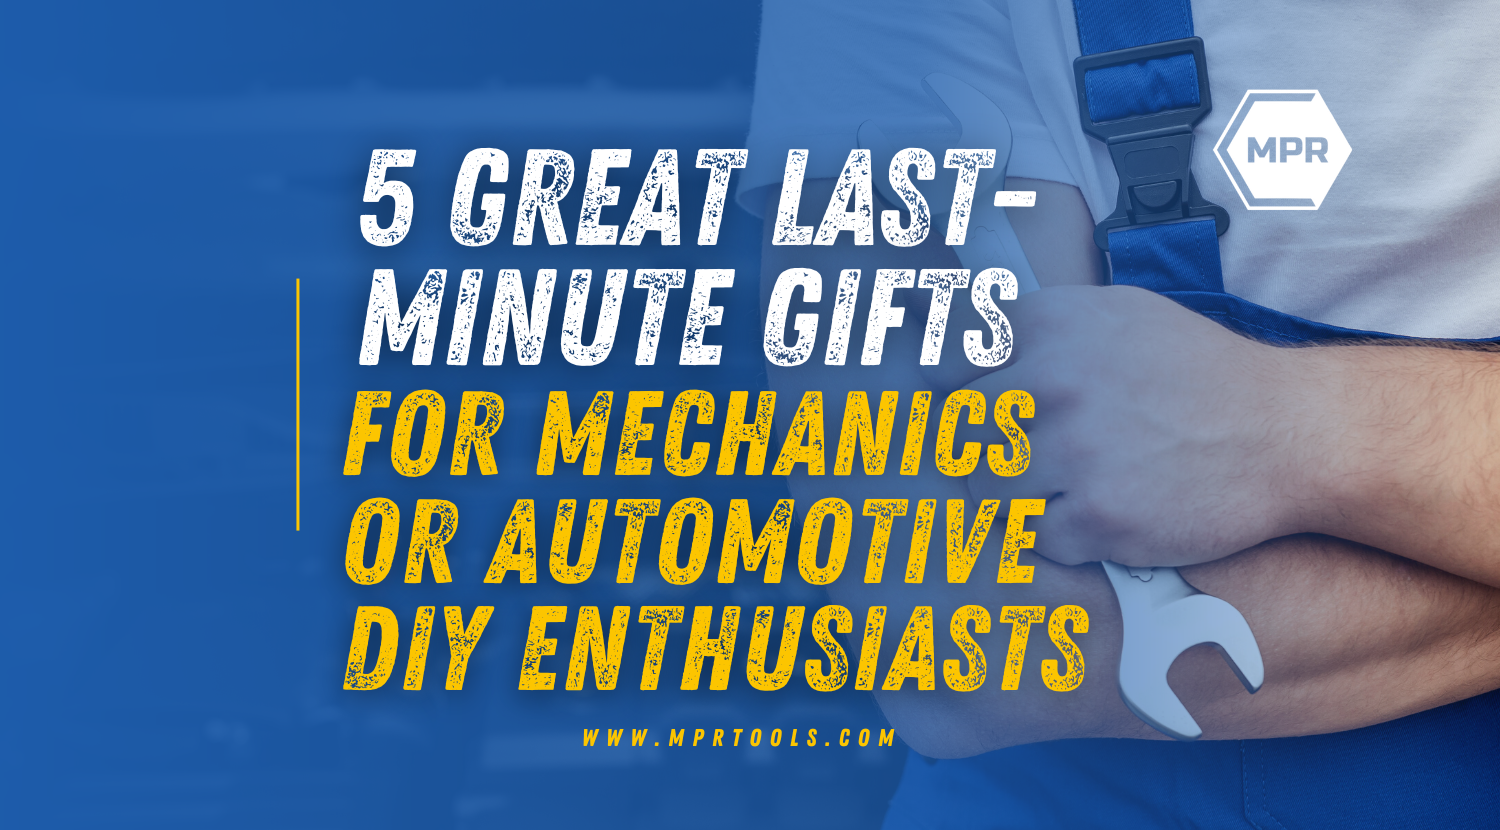 5 Great Last-Minute Gifts for Mechanics or Automotive DIY Enthusiasts